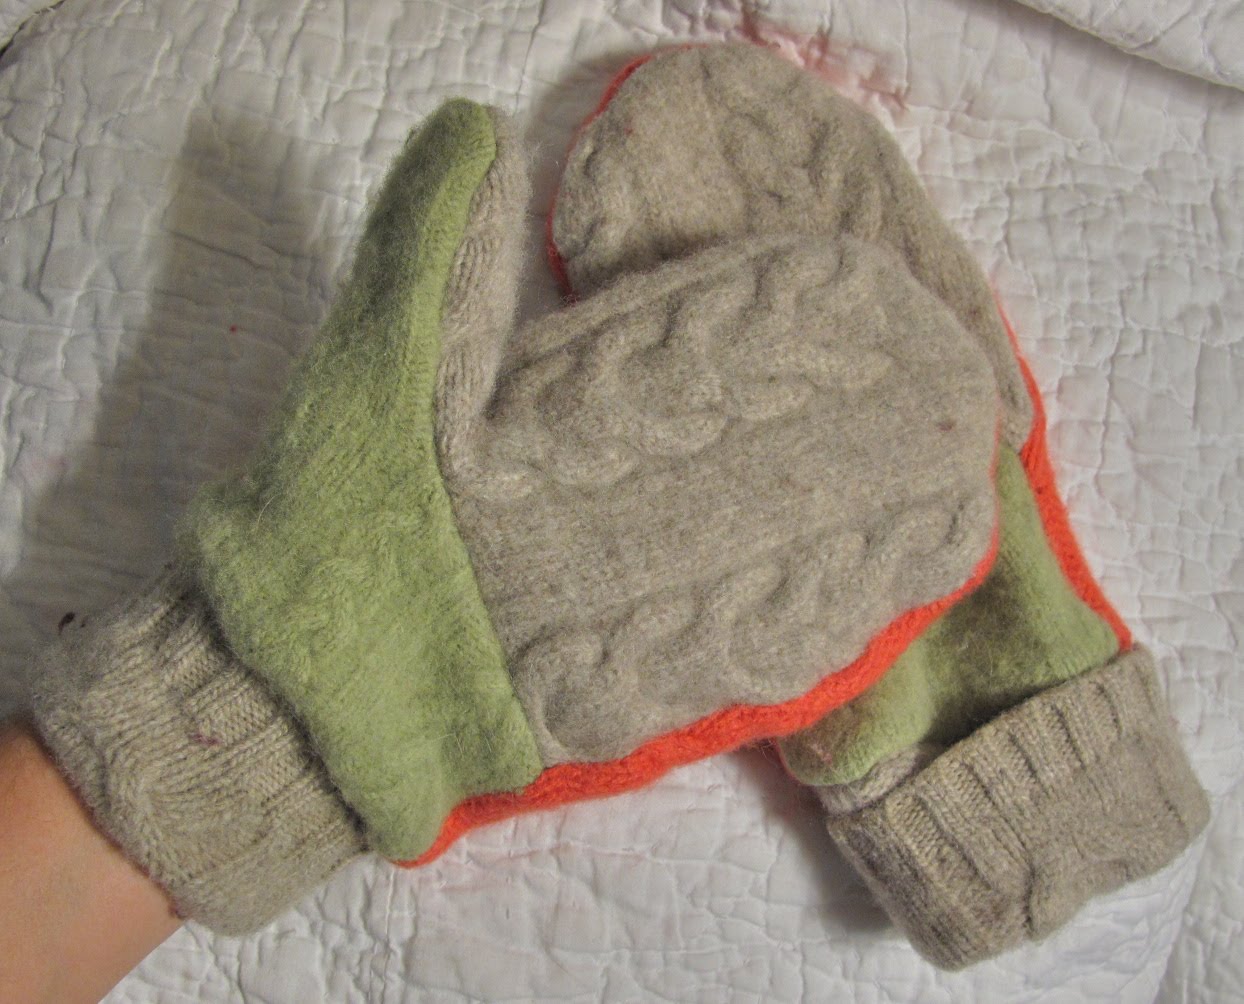 Make Mittens From an Old Sweater - How to Sew DIY Mittens Video